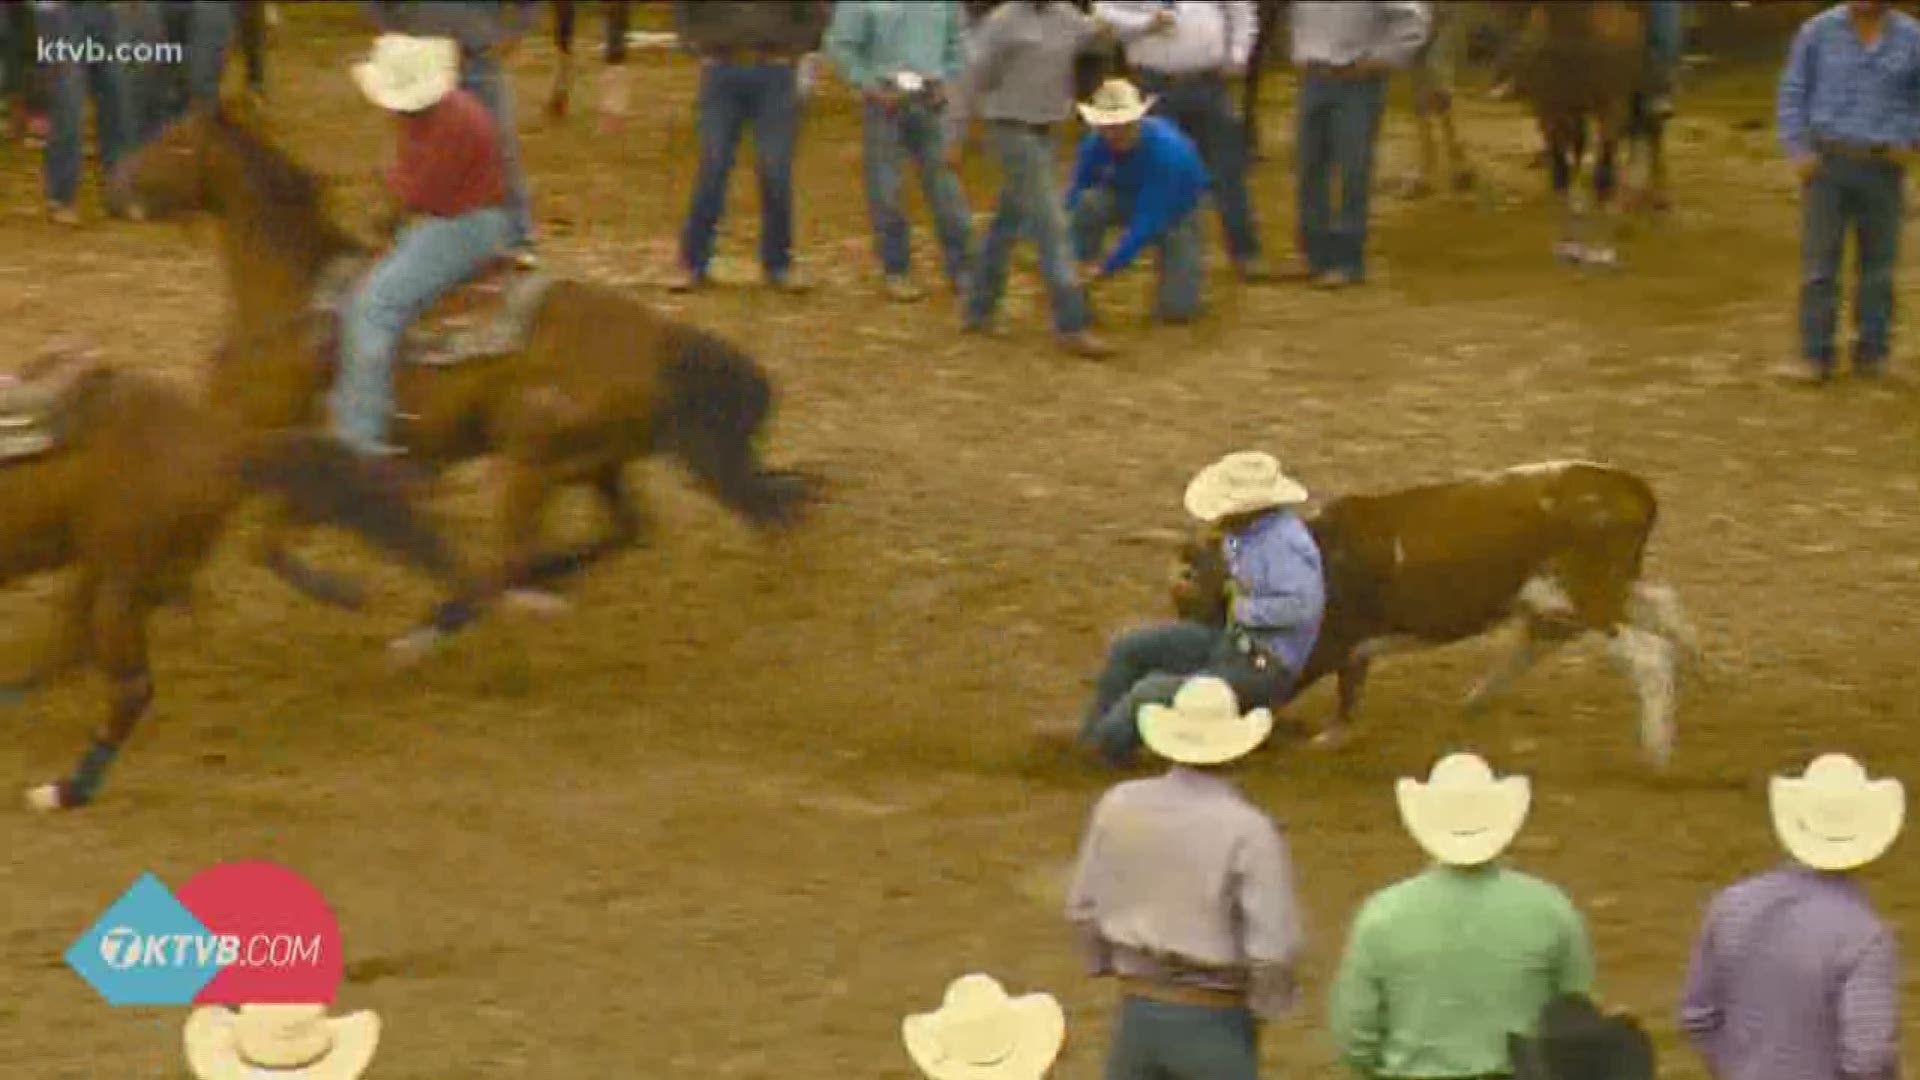 The rodeo, now in its 105th year, was scheduled to take place July 14-18 at the Ford Idaho Center in Nampa.